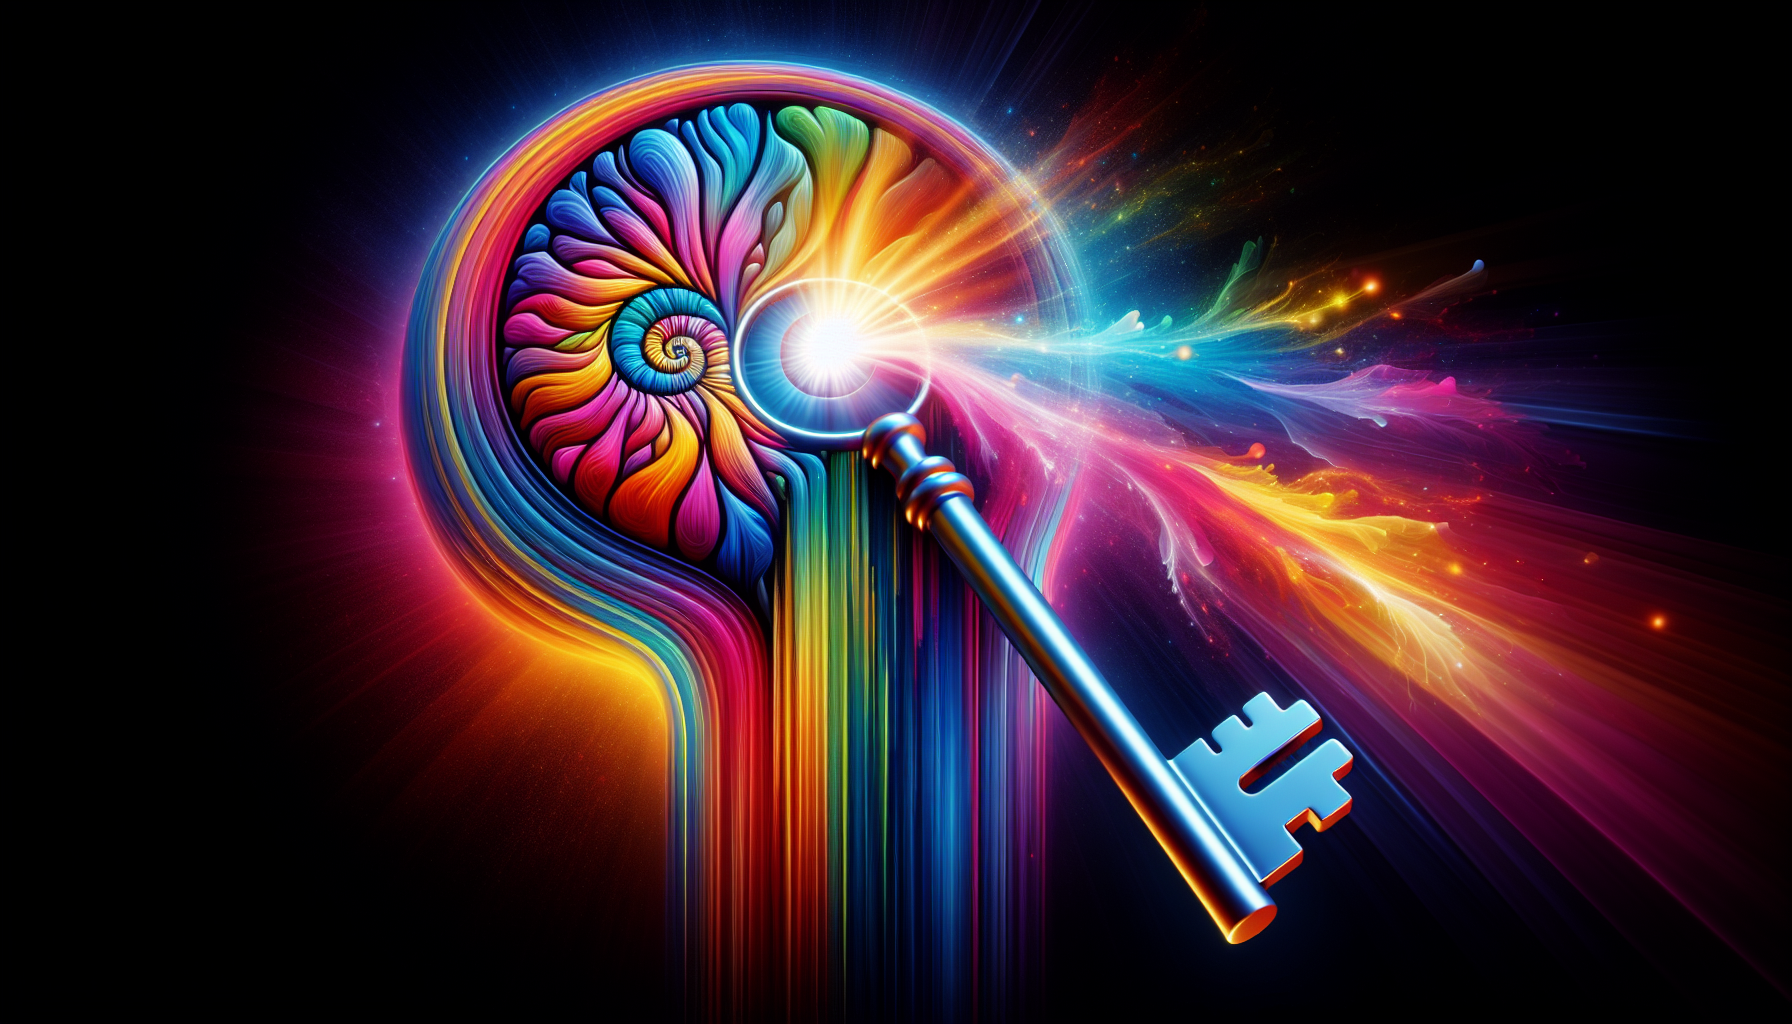 Imagine an abstract image representing the concept of unlocking creativity. This concept is depicted by a radiant key turning in an exaggerated, colorful keyhole. The keyhole is in the form of a human mind, distinguishing various areas, such as the frontal lobe, temporal lobe, etc., in bright, distinctive shades. Petals or rays of light emanate from the point where the key enters the keyhole, suggesting the launch of new ideas. Ensure that the aesthetic is modern and vibrant, with bold colors and clean lines. Note: This image does not include any text or words.